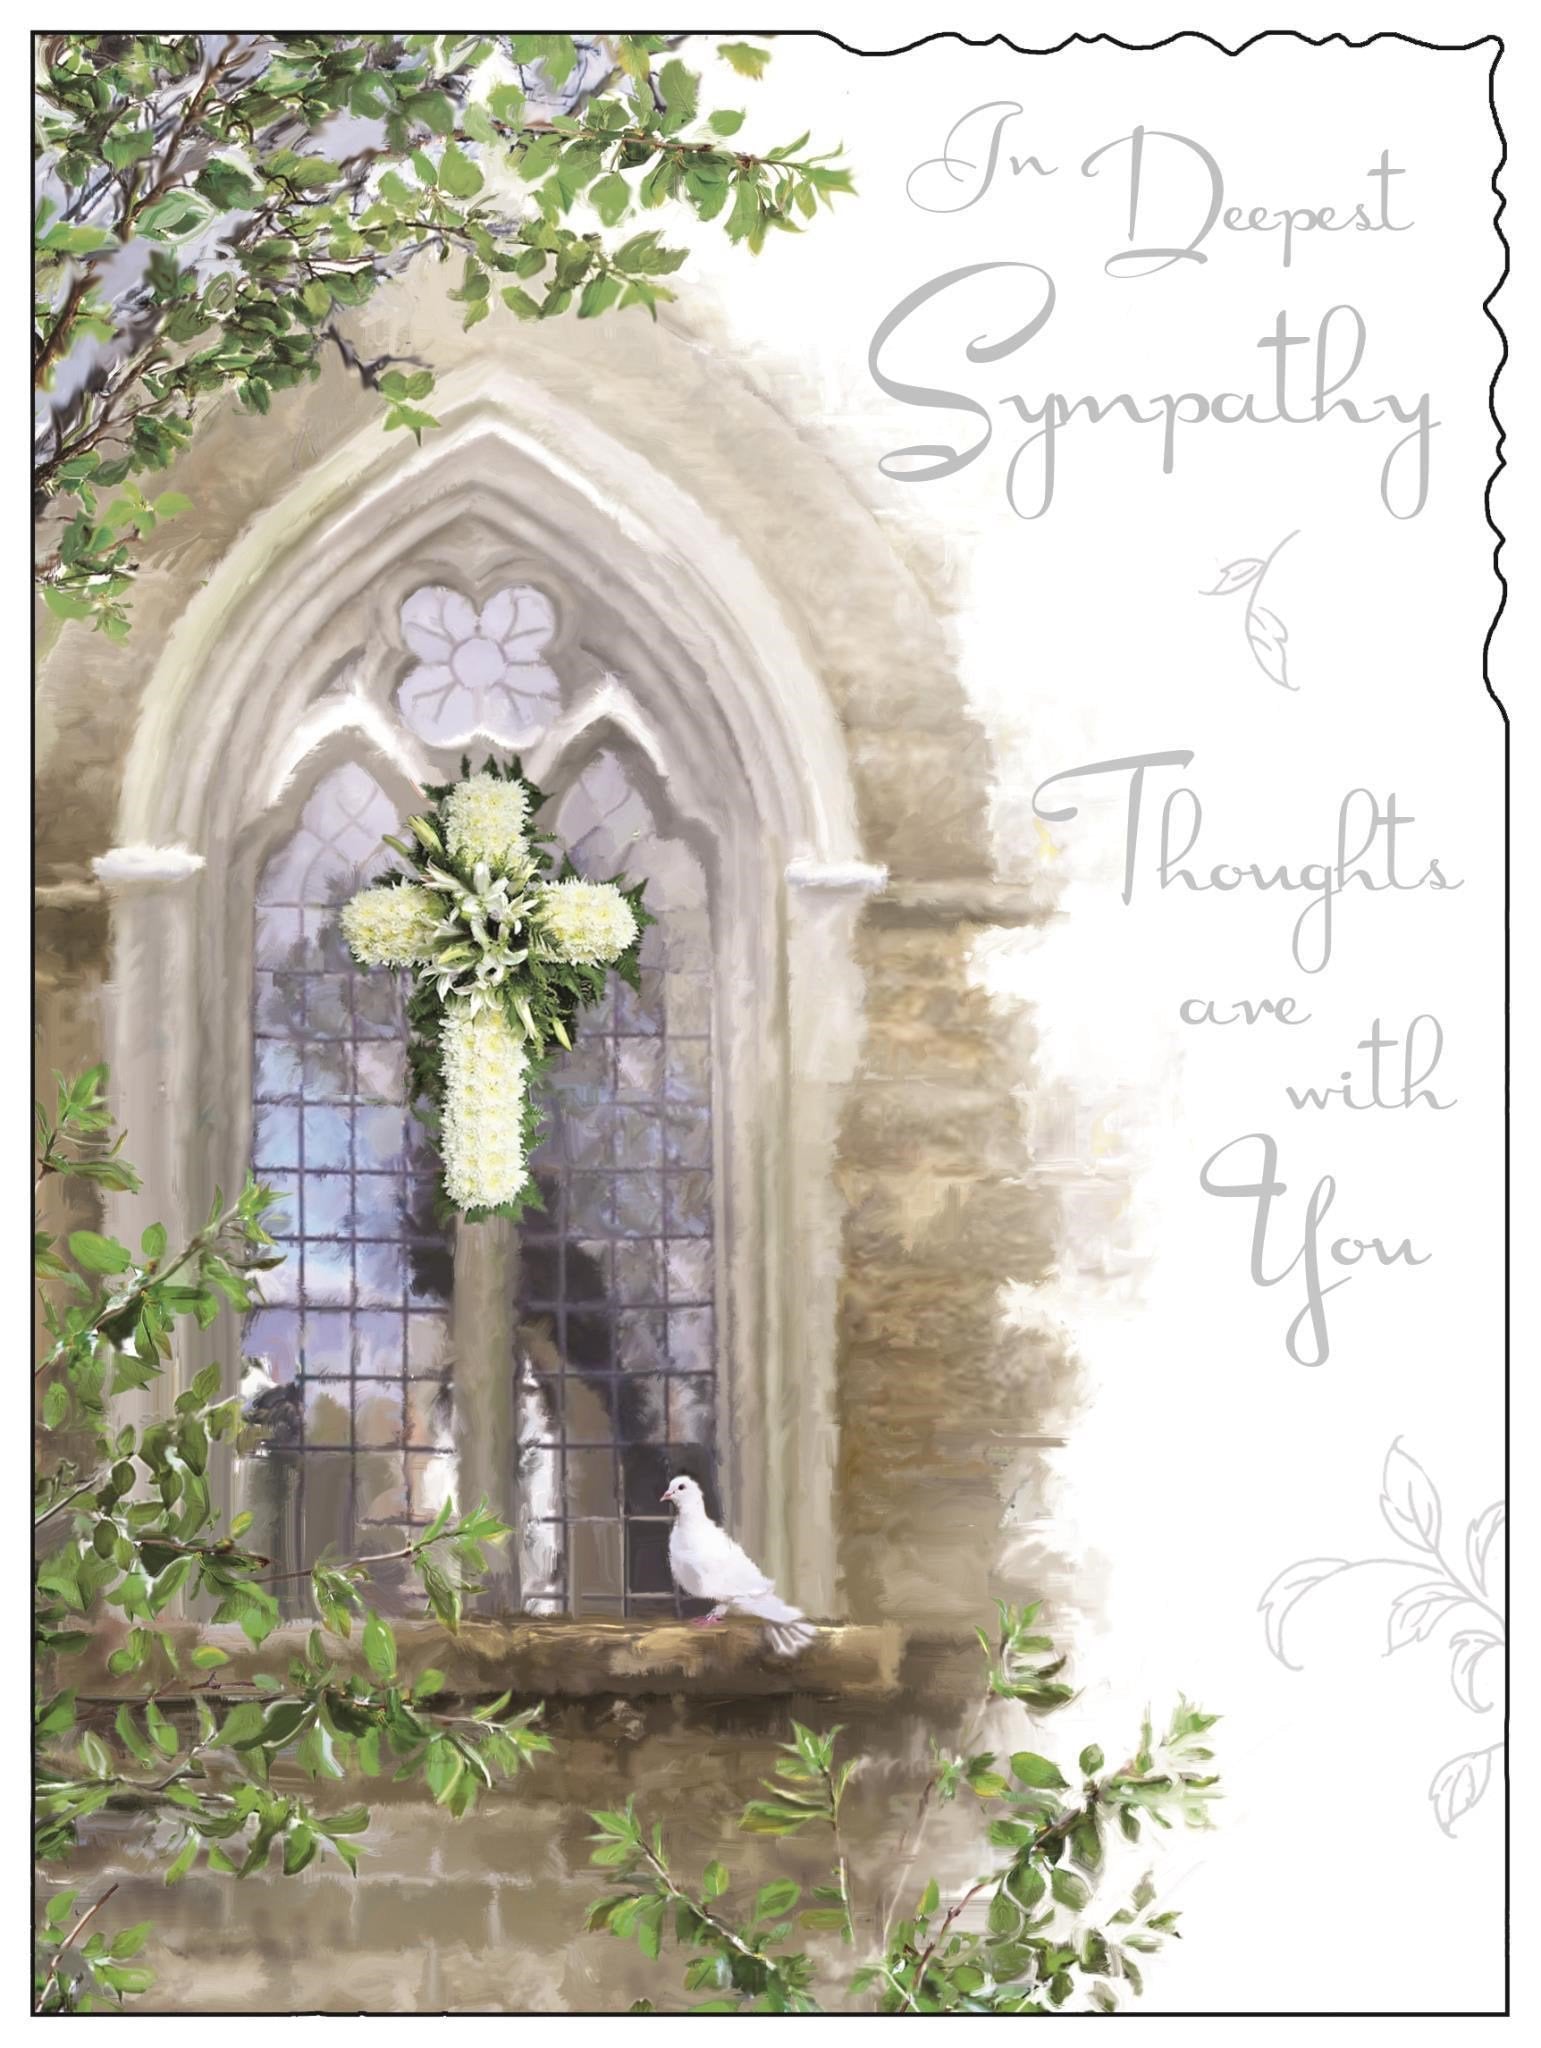 Front of In Deepest Sympathy Church Greetings Card